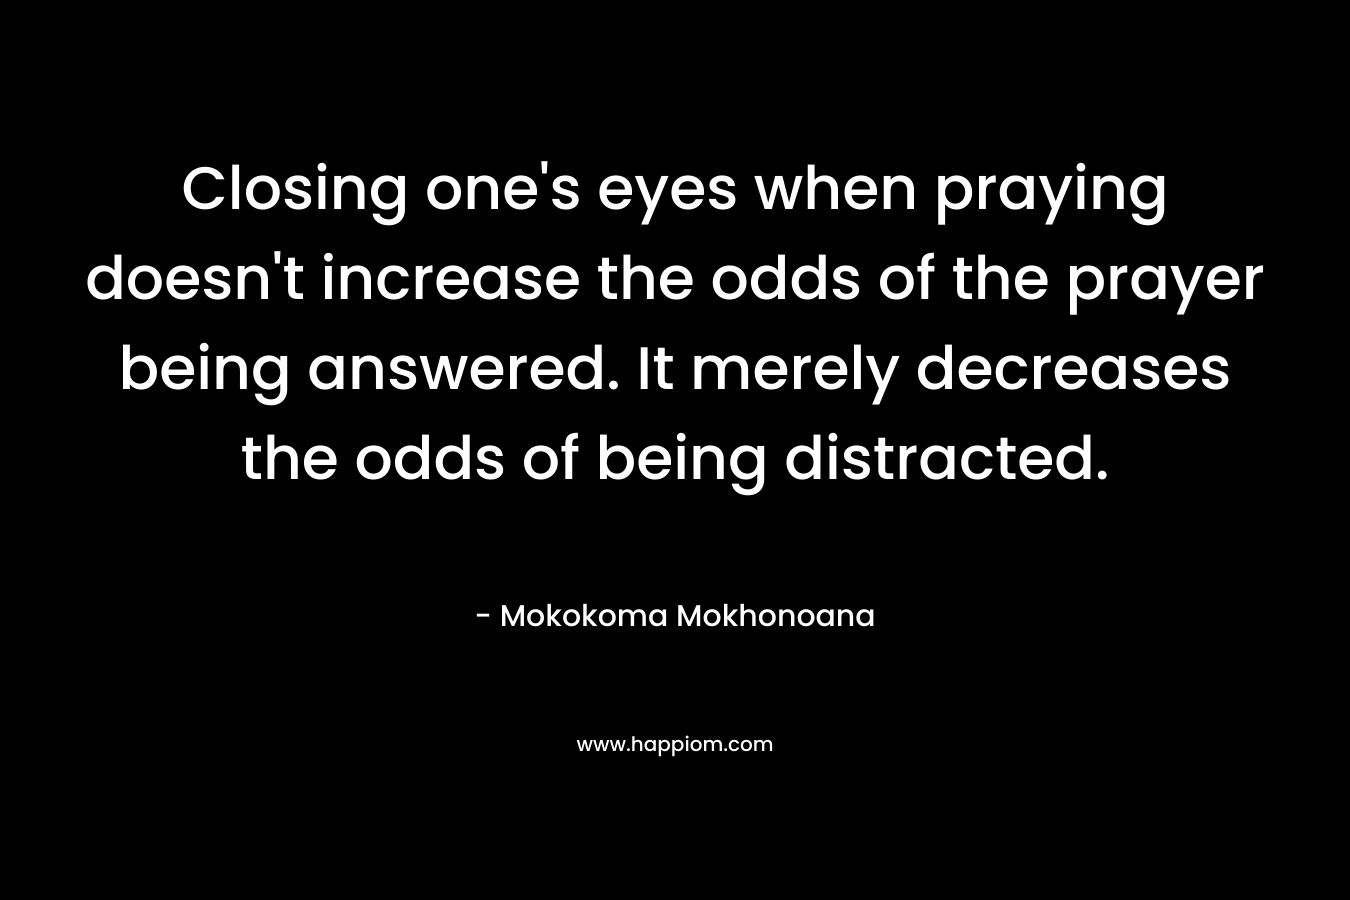 Closing one's eyes when praying doesn't increase the odds of the prayer being answered. It merely decreases the odds of being distracted.